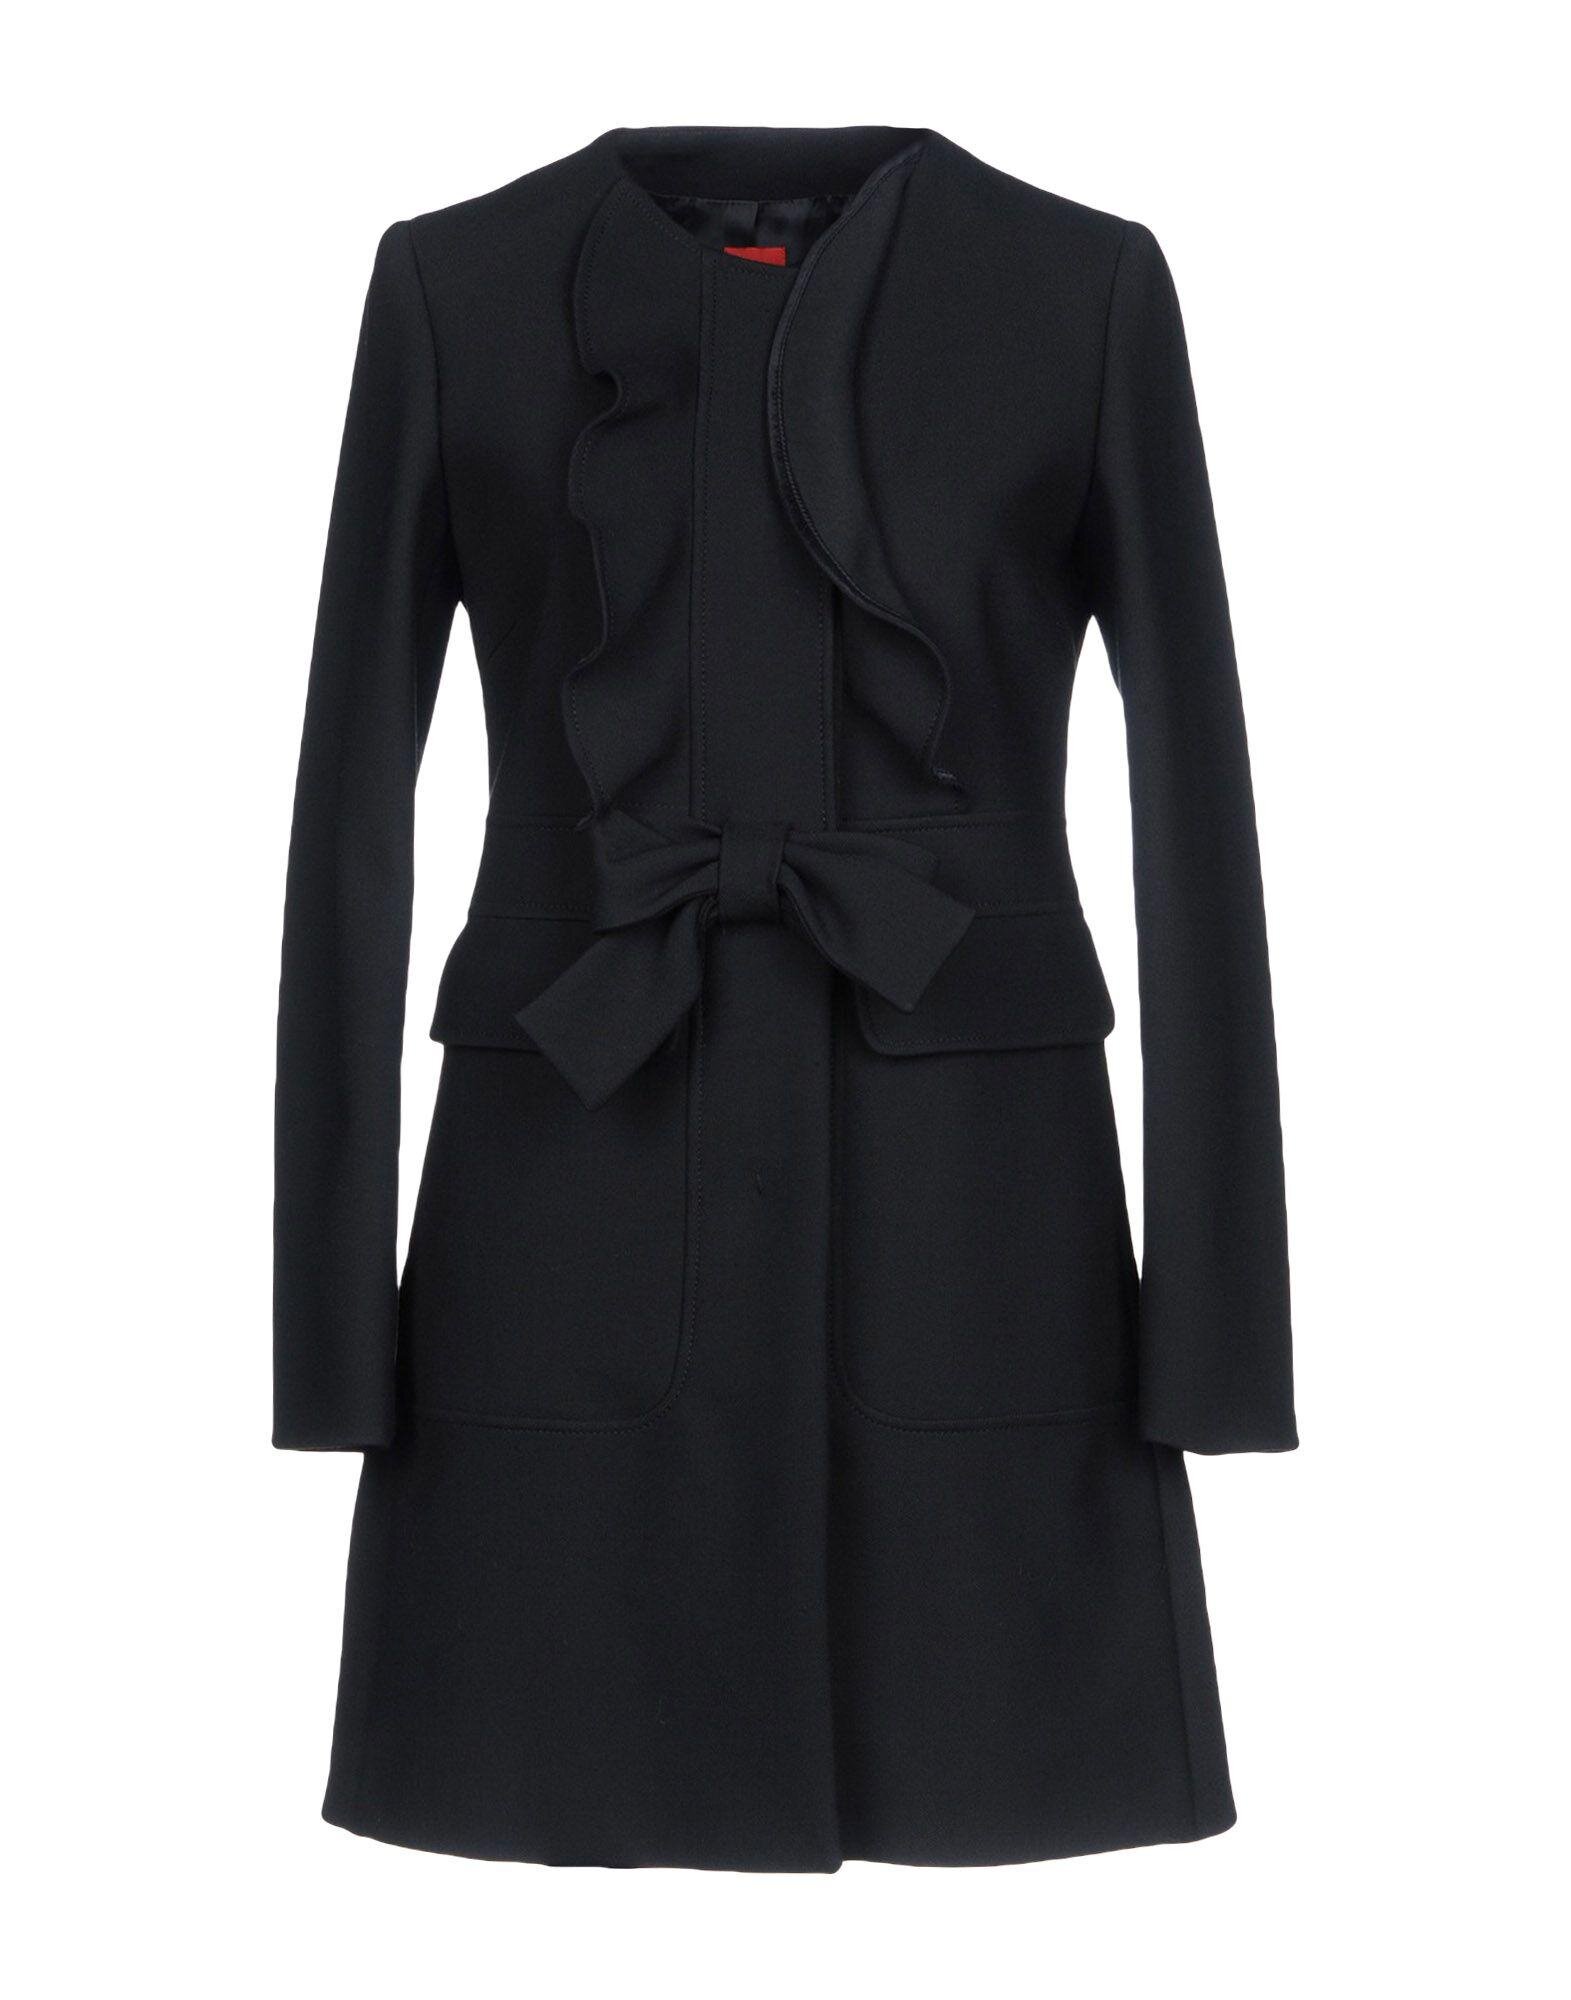 Red Valentino Bow and Ruffle Front Coat in Black.jpg